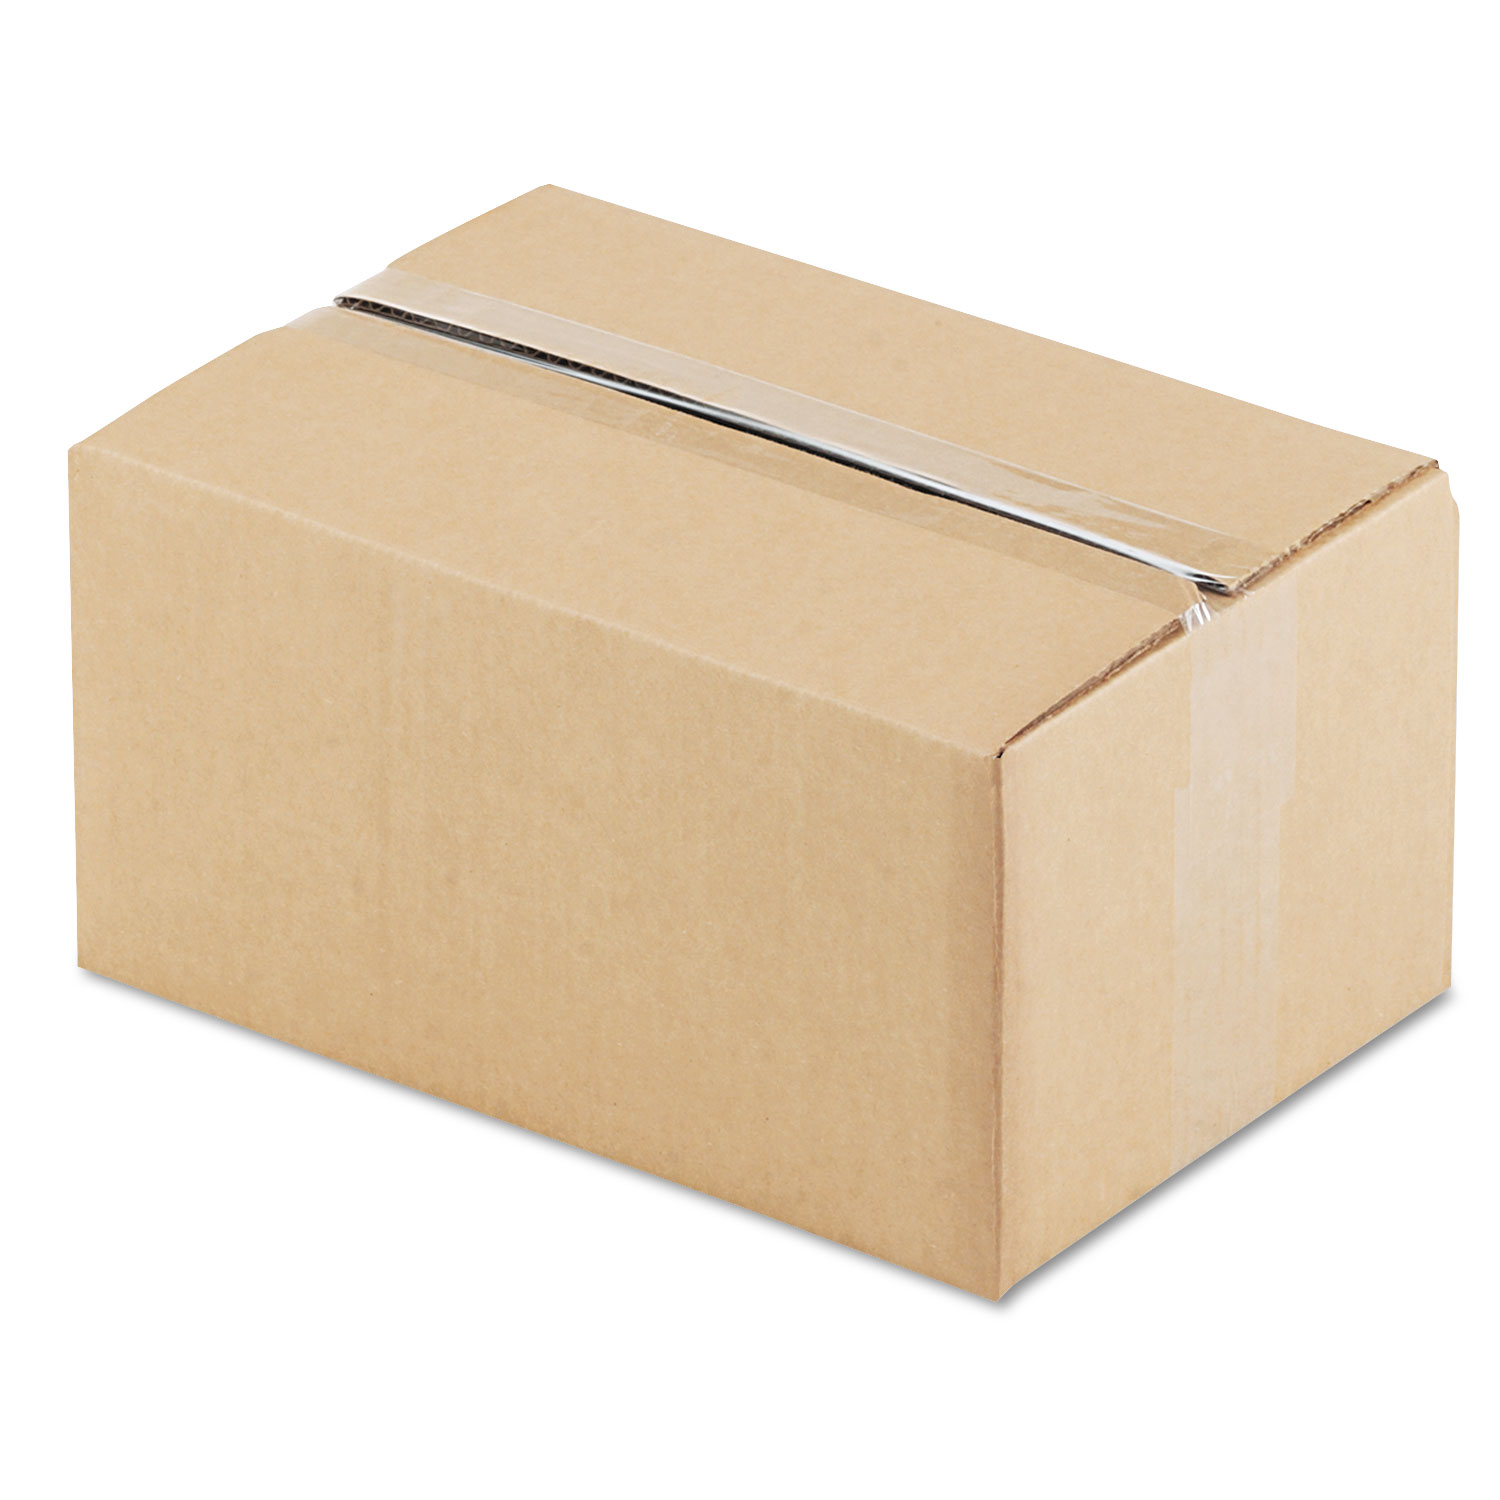 Fixed-Depth Shipping Boxes, Regular Slotted Container (RSC), 12